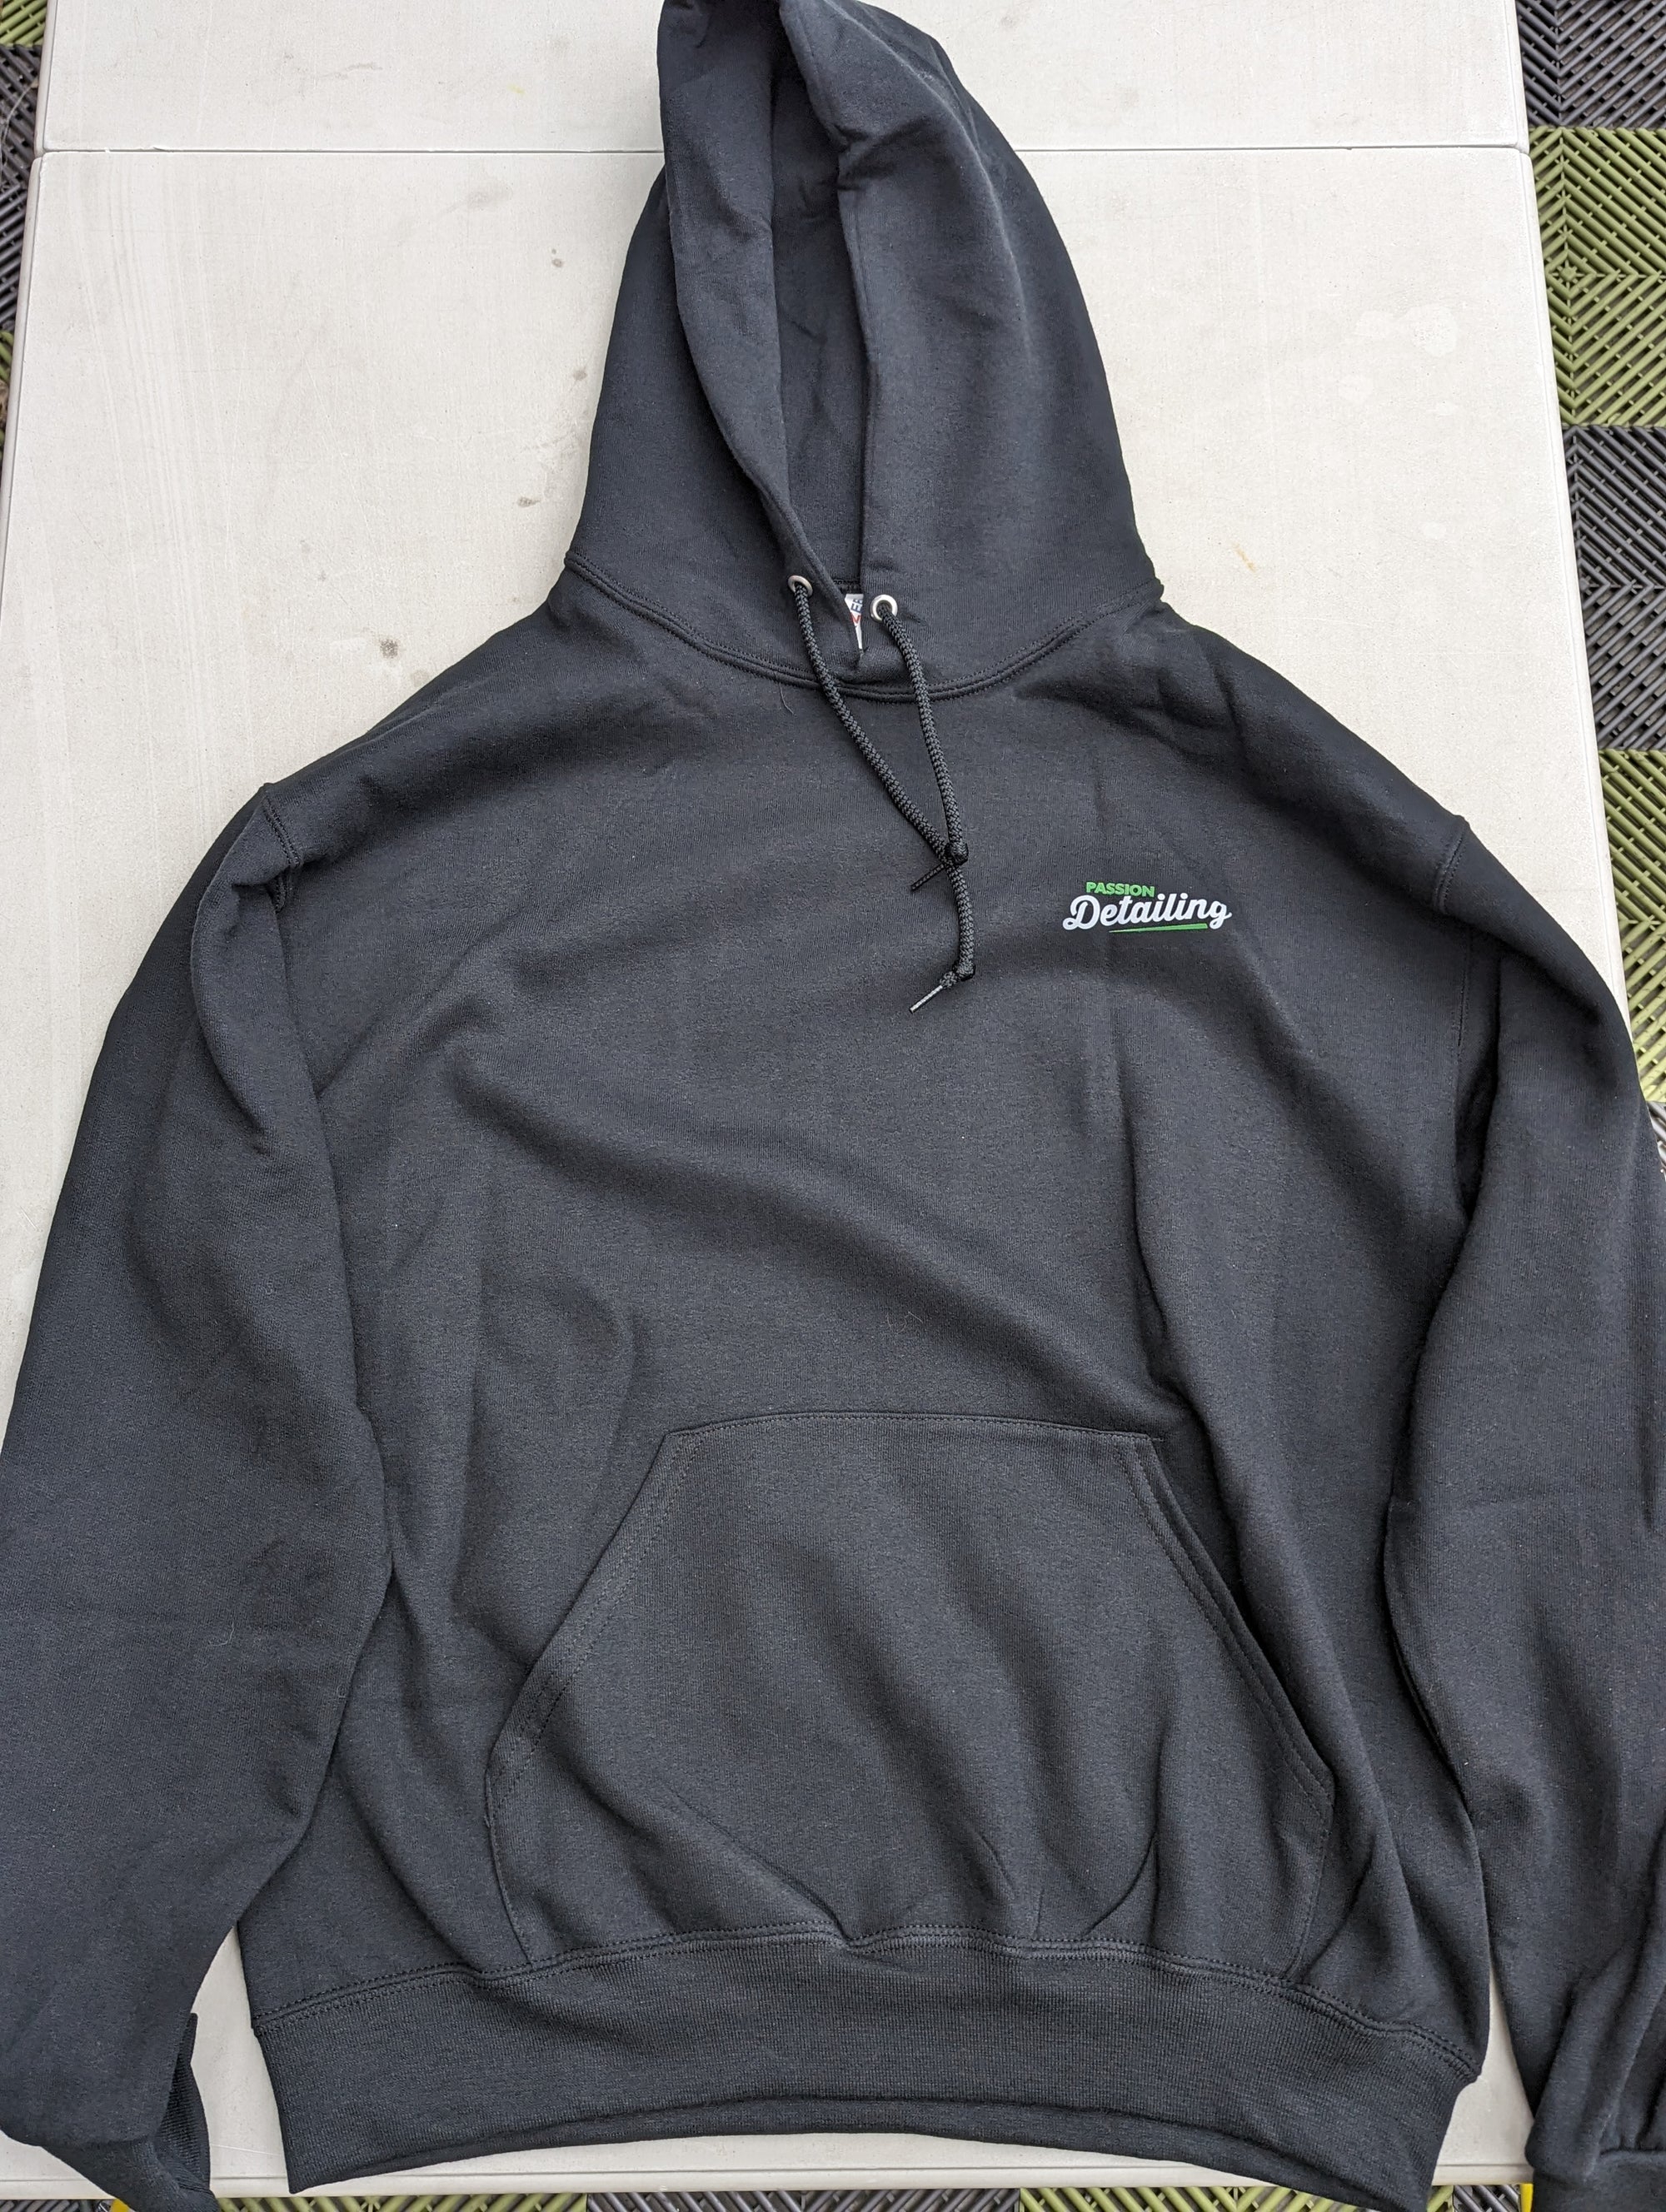 Passion Detailing Hoodie